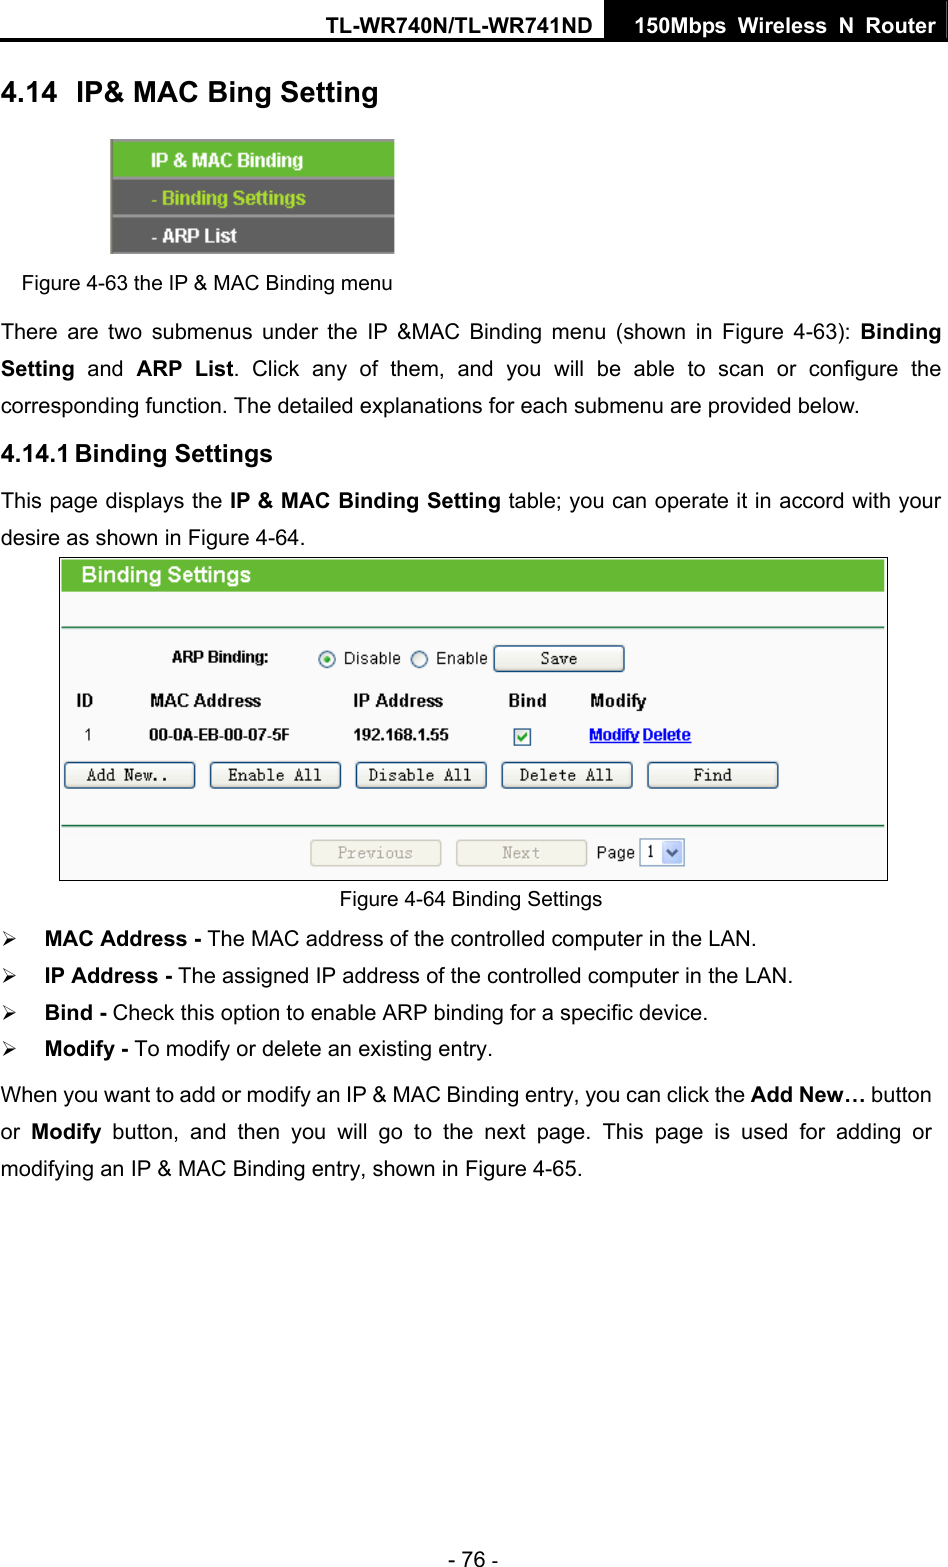 TL-WR740N/TL-WR741ND 150Mbps Wireless N Router - 76 - 4.14  IP&amp; MAC Bing Setting  Figure 4-63 the IP &amp; MAC Binding menu There are two submenus under the IP &amp;MAC Binding menu (shown in Figure 4-63):  Binding Setting  and ARP List. Click any of them, and you will be able to scan or configure the corresponding function. The detailed explanations for each submenu are provided below. 4.14.1 Binding Settings This page displays the IP &amp; MAC Binding Setting table; you can operate it in accord with your desire as shown in Figure 4-64.   Figure 4-64 Binding Settings ¾ MAC Address - The MAC address of the controlled computer in the LAN.   ¾ IP Address - The assigned IP address of the controlled computer in the LAN.   ¾ Bind - Check this option to enable ARP binding for a specific device.   ¾ Modify - To modify or delete an existing entry.   When you want to add or modify an IP &amp; MAC Binding entry, you can click the Add New… button or  Modify button, and then you will go to the next page. This page is used for adding or modifying an IP &amp; MAC Binding entry, shown in Figure 4-65.   